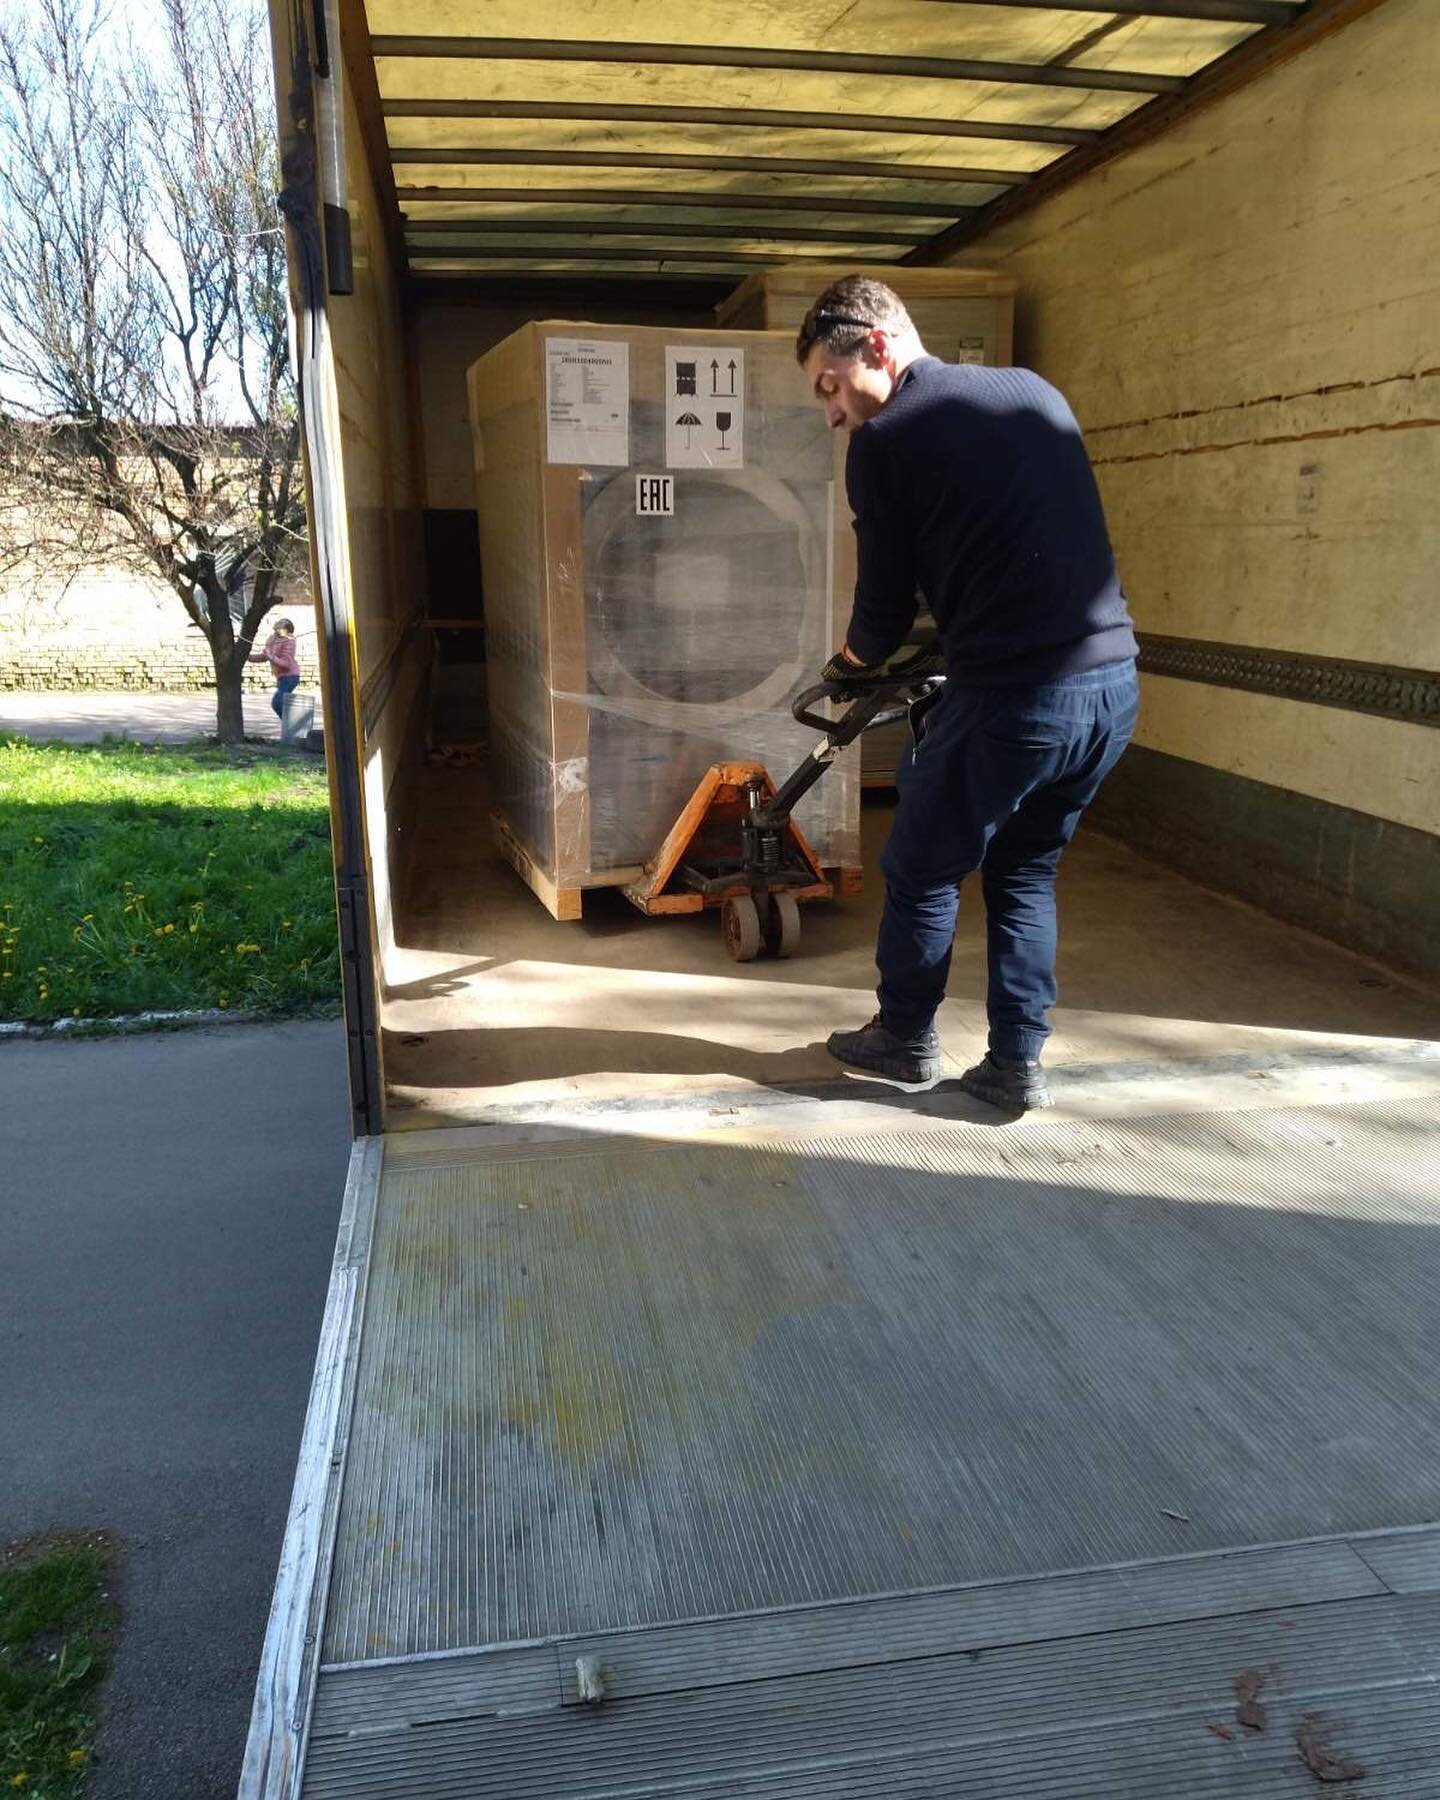 We are pleased to report that about one week ago 2 industrial washing machines, 1 industrial dryer and 1 industrial ironing roller were delivered to the Boryspil Multidisciplinary Intensive Care Hospital
КНП &laquo;Бориспільська багатопрофільна лікар